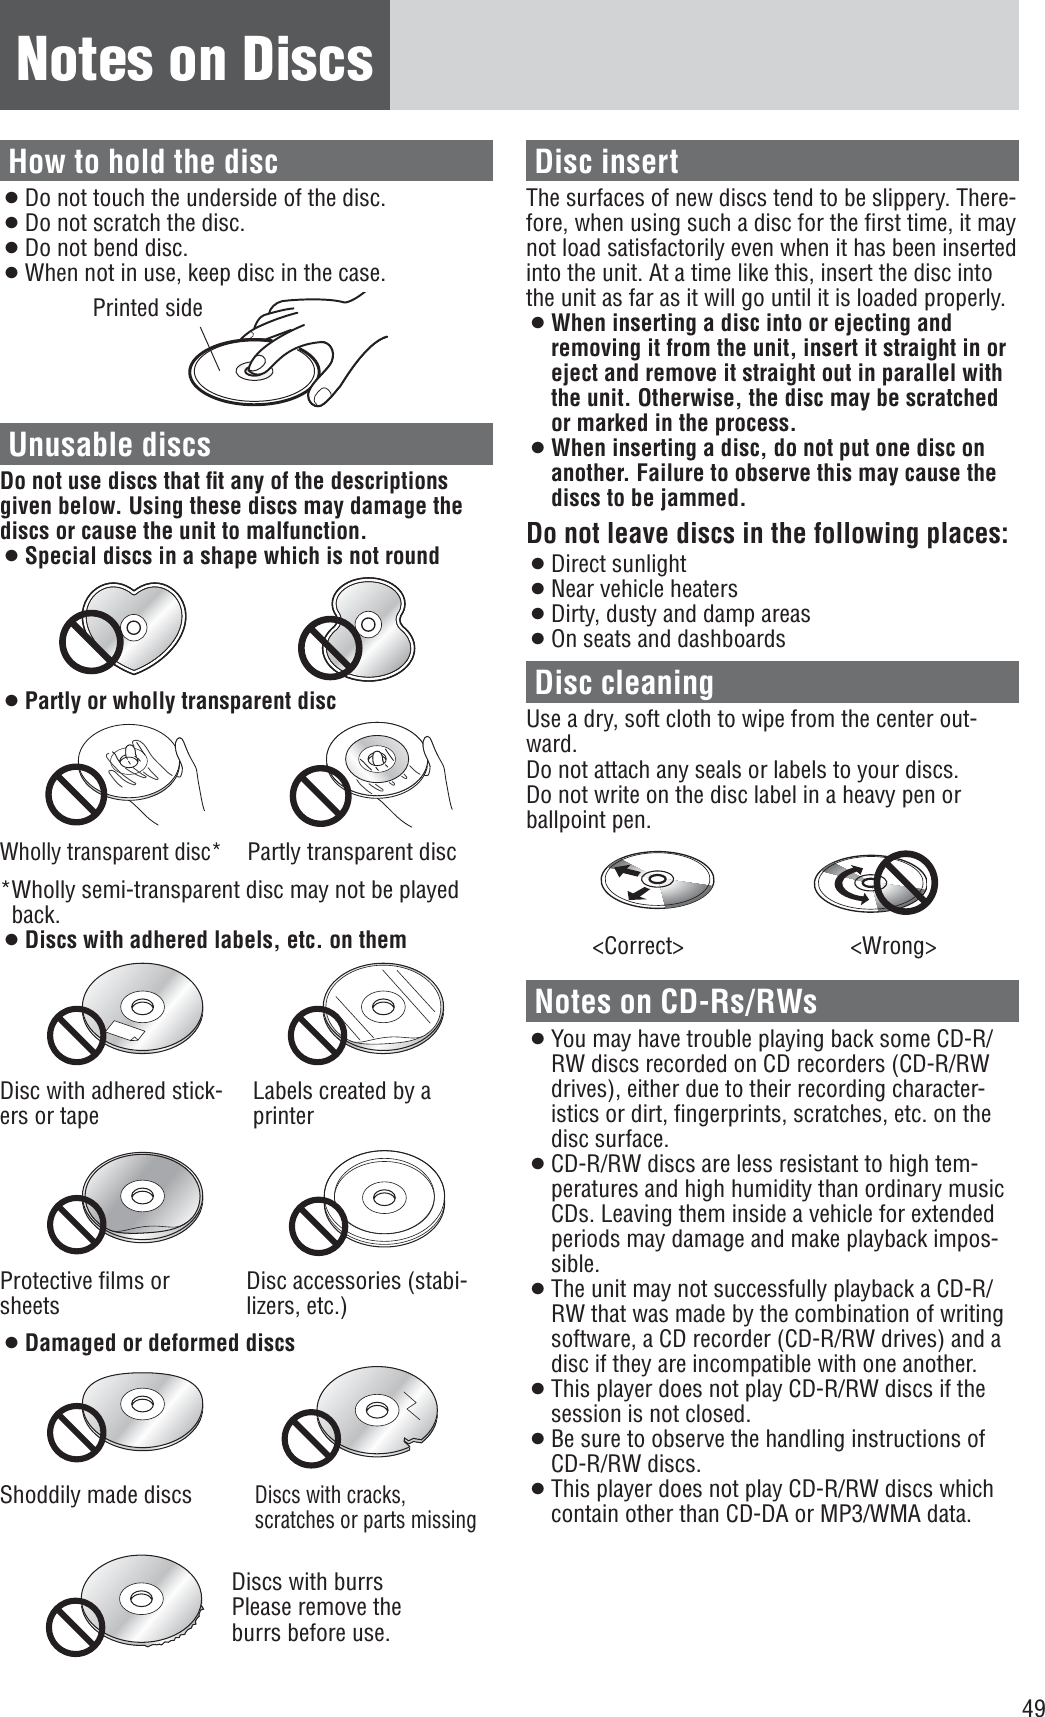 49Notes on DiscsHow to hold the disc¡Do not touch the underside of the disc.¡Do not scratch the disc.¡Do not bend disc.¡When not in use, keep disc in the case.Printed sideUnusable discsDo not use discs that ﬁt any of the descriptions given below. Using these discs may damage the discs or cause the unit to malfunction.¡Special discs in a shape which is not round¡Partly or wholly transparent discWholly transparent disc*Partly transparent disc*Wholly semi-transparent disc may not be played back.¡Discs with adhered labels, etc. on themDisc with adhered stick-ers or tapeLabels created by a printerProtective ﬁlms or sheetsDisc accessories (stabi-lizers, etc.)¡Damaged or deformed discsShoddily made discsDiscs with cracks, scratches or parts missingDiscs with burrsPlease remove the burrs before use.Disc insertThe surfaces of new discs tend to be slippery. There-fore, when using such a disc for the ﬁrst time, it may not load satisfactorily even when it has been inserted into the unit. At a time like this, insert the disc into the unit as far as it will go until it is loaded properly.¡When inserting a disc into or ejecting and removing it from the unit, insert it straight in or eject and remove it straight out in parallel with the unit. Otherwise, the disc may be scratched or marked in the process.¡When inserting a disc, do not put one disc on another. Failure to observe this may cause the discs to be jammed.Do not leave discs in the following places:¡Direct sunlight¡Near vehicle heaters¡Dirty, dusty and damp areas¡On seats and dashboardsDisc cleaningUse a dry, soft cloth to wipe from the center out-ward.Do not attach any seals or labels to your discs.Do not write on the disc label in a heavy pen or ballpoint pen.&lt;Correct&gt; &lt;Wrong&gt;Notes on CD-Rs/RWs¡You may have trouble playing back some CD-R/RW discs recorded on CD recorders (CD-R/RW drives), either due to their recording character-istics or dirt, ﬁngerprints, scratches, etc. on the disc surface.¡CD-R/RW discs are less resistant to high tem-peratures and high humidity than ordinary music CDs. Leaving them inside a vehicle for extended periods may damage and make playback impos-sible.¡The unit may not successfully playback a CD-R/RW that was made by the combination of writing software, a CD recorder (CD-R/RW drives) and a disc if they are incompatible with one another.¡This player does not play CD-R/RW discs if the session is not closed.¡Be sure to observe the handling instructions of CD-R/RW discs.¡This player does not play CD-R/RW discs which contain other than CD-DA or MP3/WMA data.